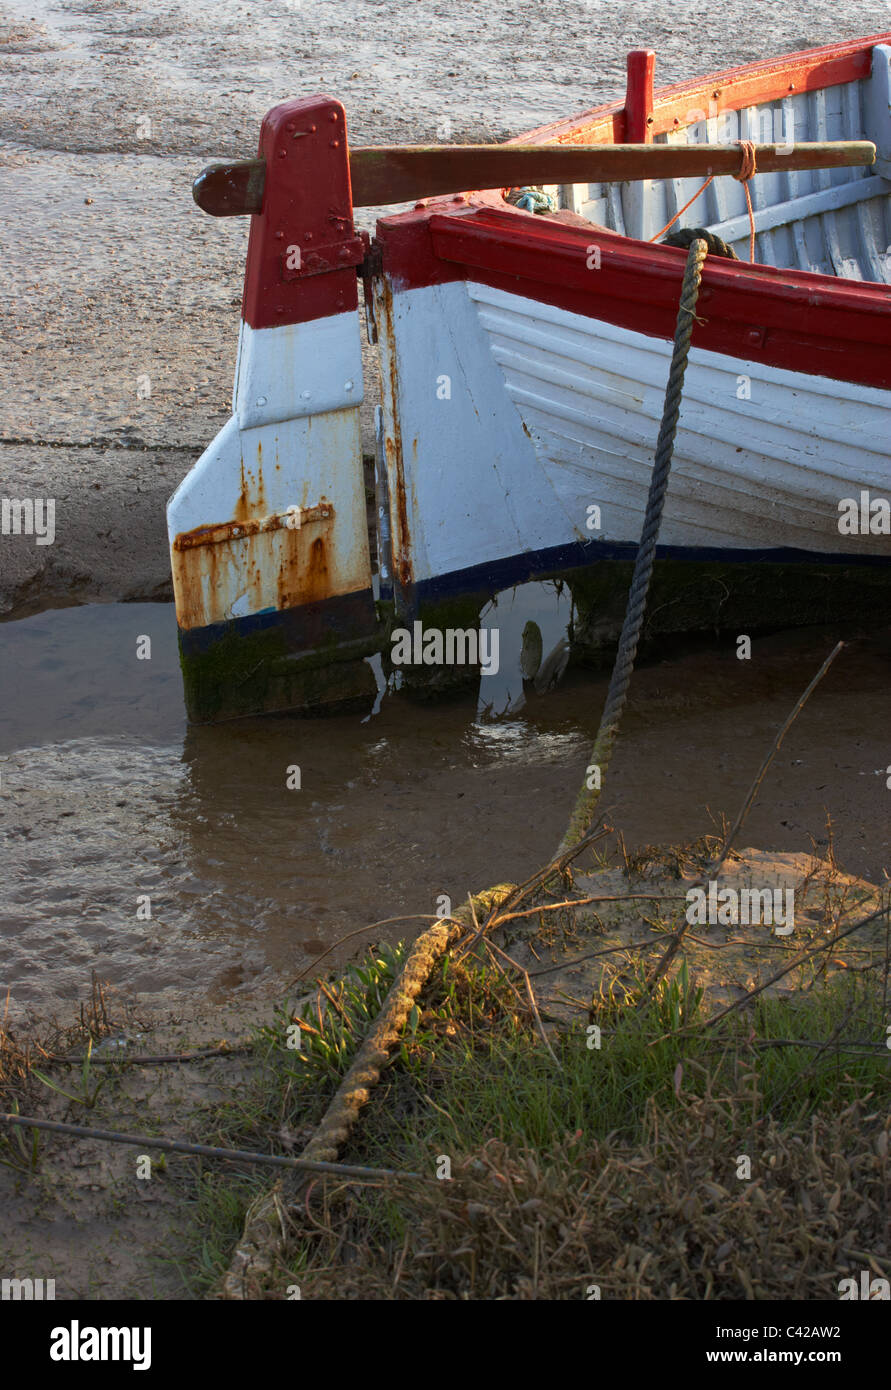 A study of a boat at Thornham Creek in North Norfolk, England Stock Photo